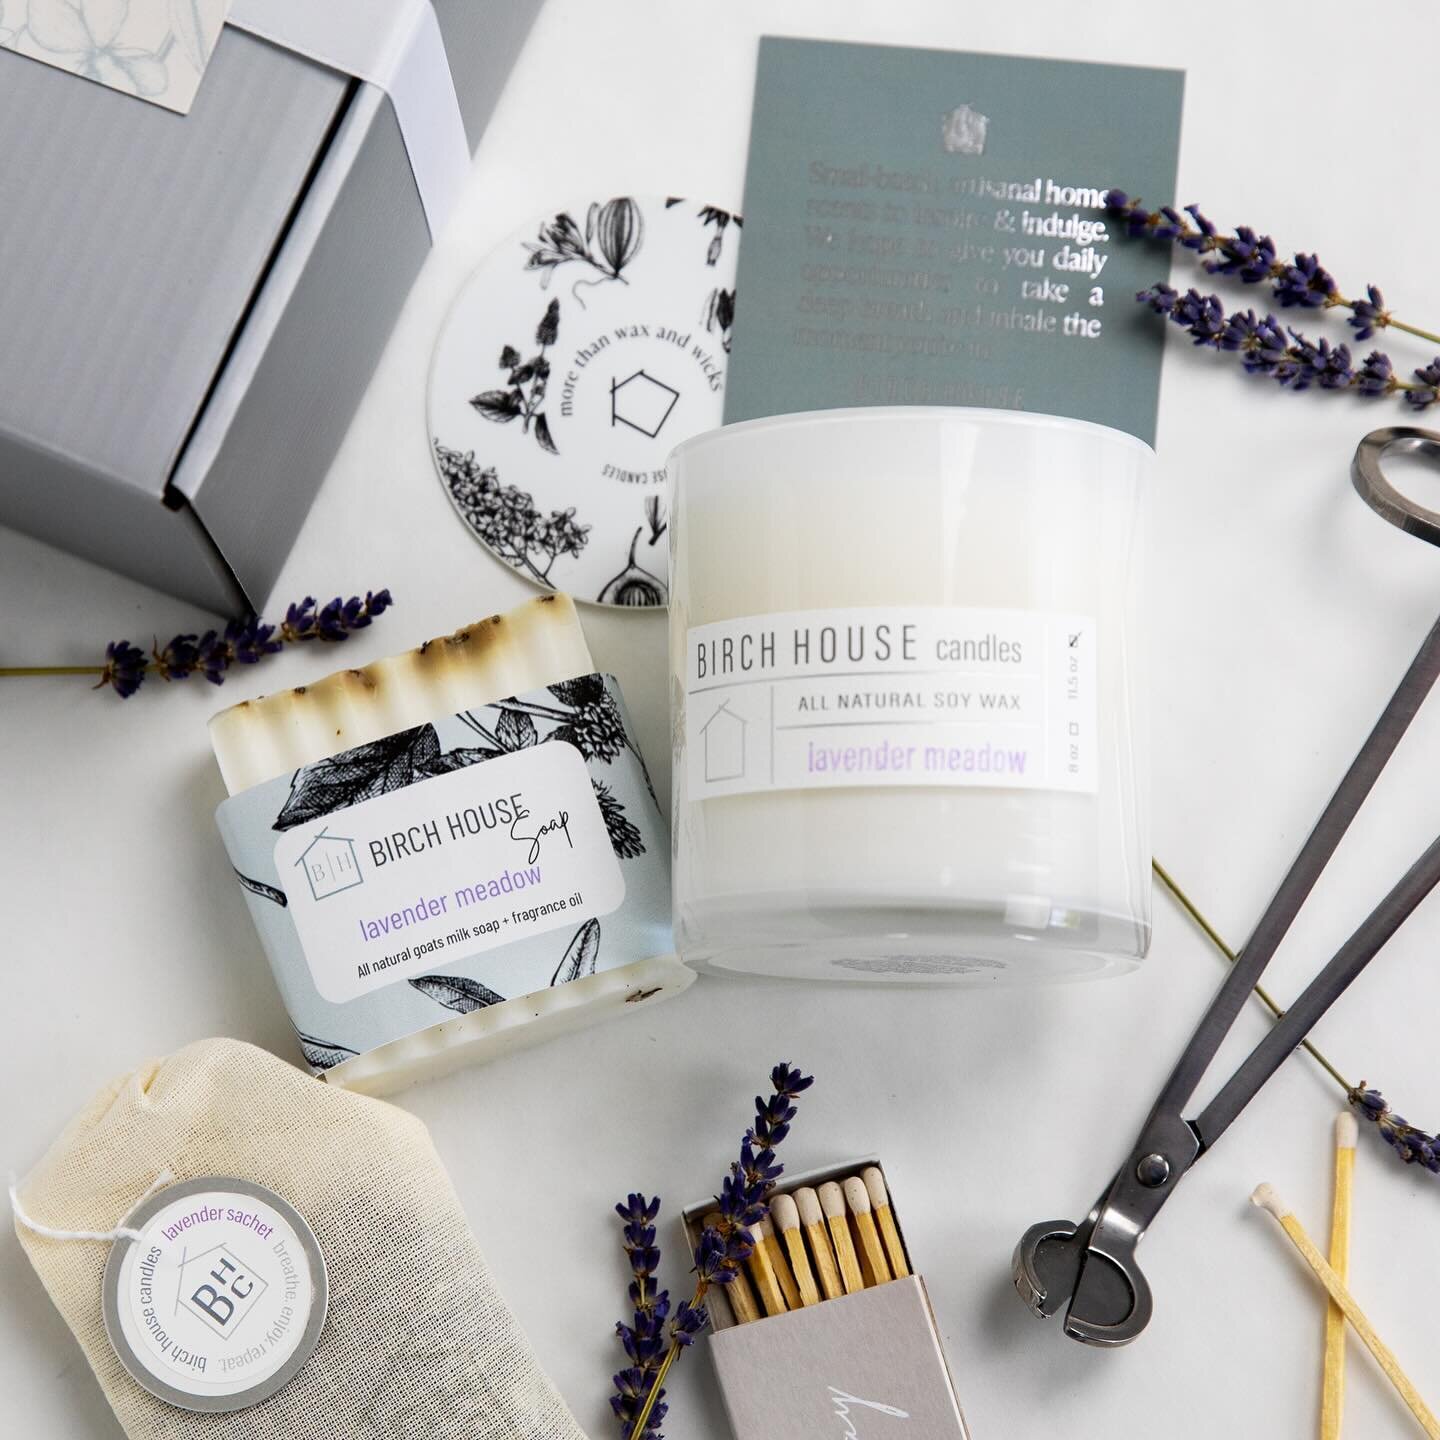 💜For the lavender lover💜
 We have the perfect gift box to give her.  Candle + soap + sachet + matches + wick trimmer.  What better way to introduce someone you love to Birch House Candles.  Small-batch, clean burning and stress reducing! 

Get your